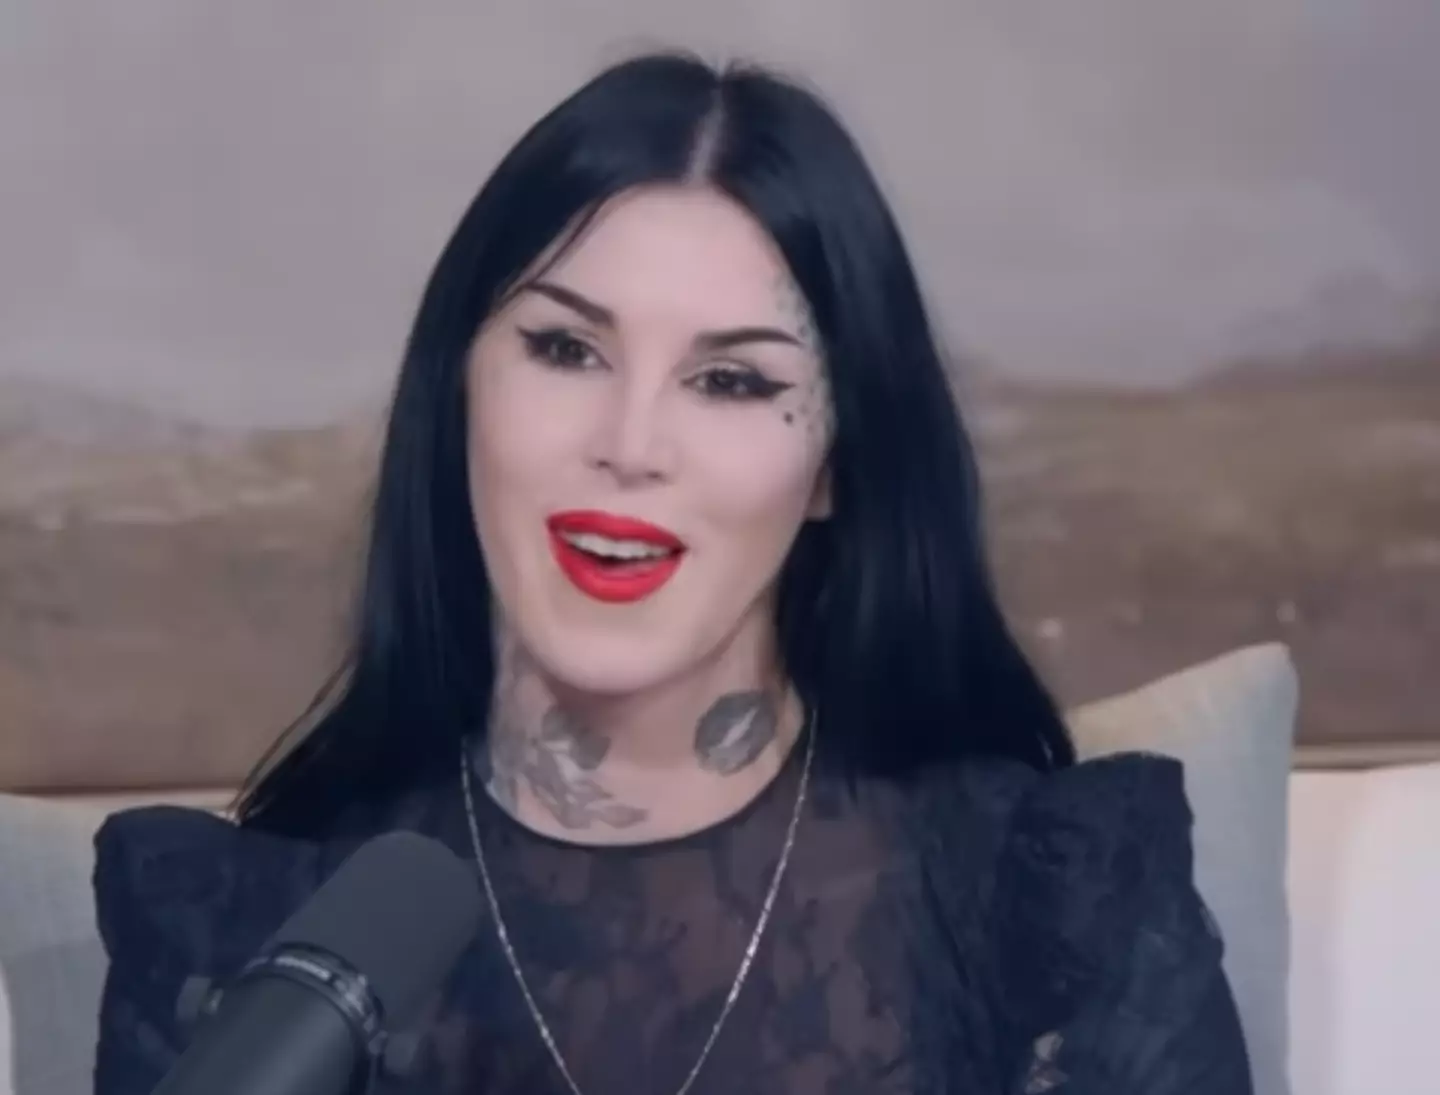 Kat Von D is hopeful her husband will join in her faith.